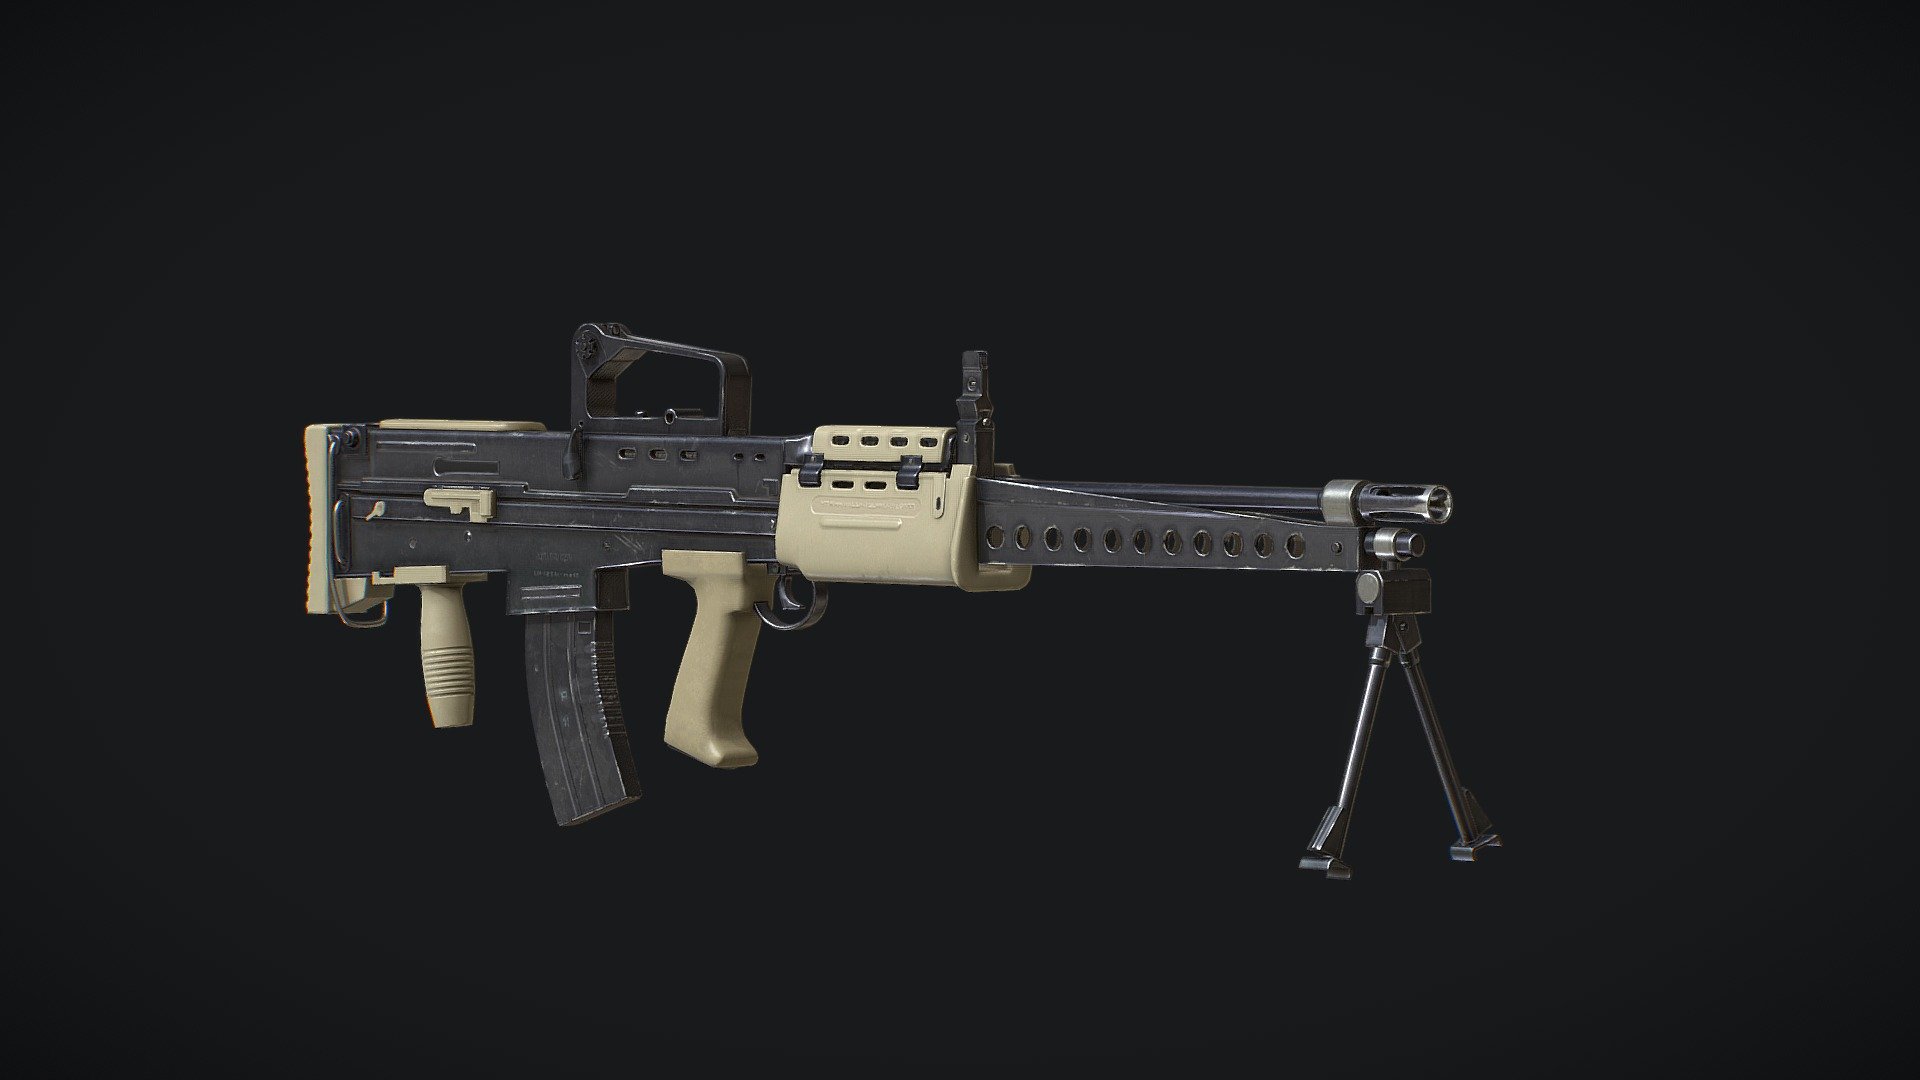 https://www.artstation.com/artwork/ArgoNm

Model L86 Lsw with folding wire shoulder rest and bipod. The high-poly model is made in Blender completely sub-ready. Mapping was done in Rizom UV. The low poly model is optimized and ready to be imported into the game, the textures were created in Substance Painter. Visualization was done in Marmoset Toolbag 4.

Dear friends, I am glad that you write to me by mail about receiving this model in your projects.
I'm giving it away for free and have attached the link in my artstation - L86 Lsw (free) - 3D model by MEATMAN (@Meatman322) 3d model